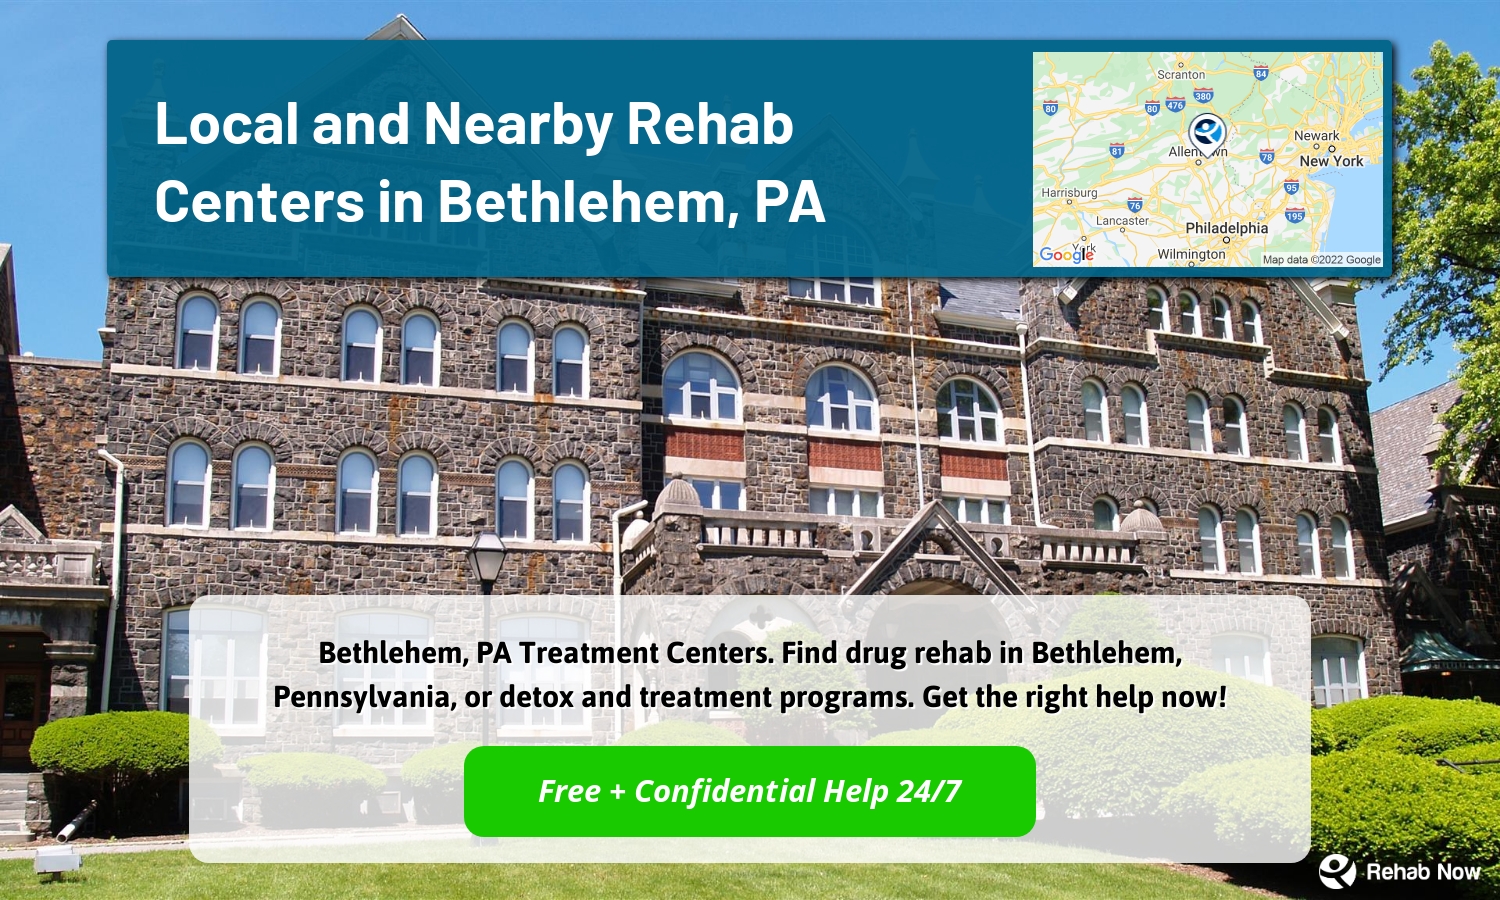 Bethlehem, PA Treatment Centers. Find drug rehab in Bethlehem, Pennsylvania, or detox and treatment programs. Get the right help now!